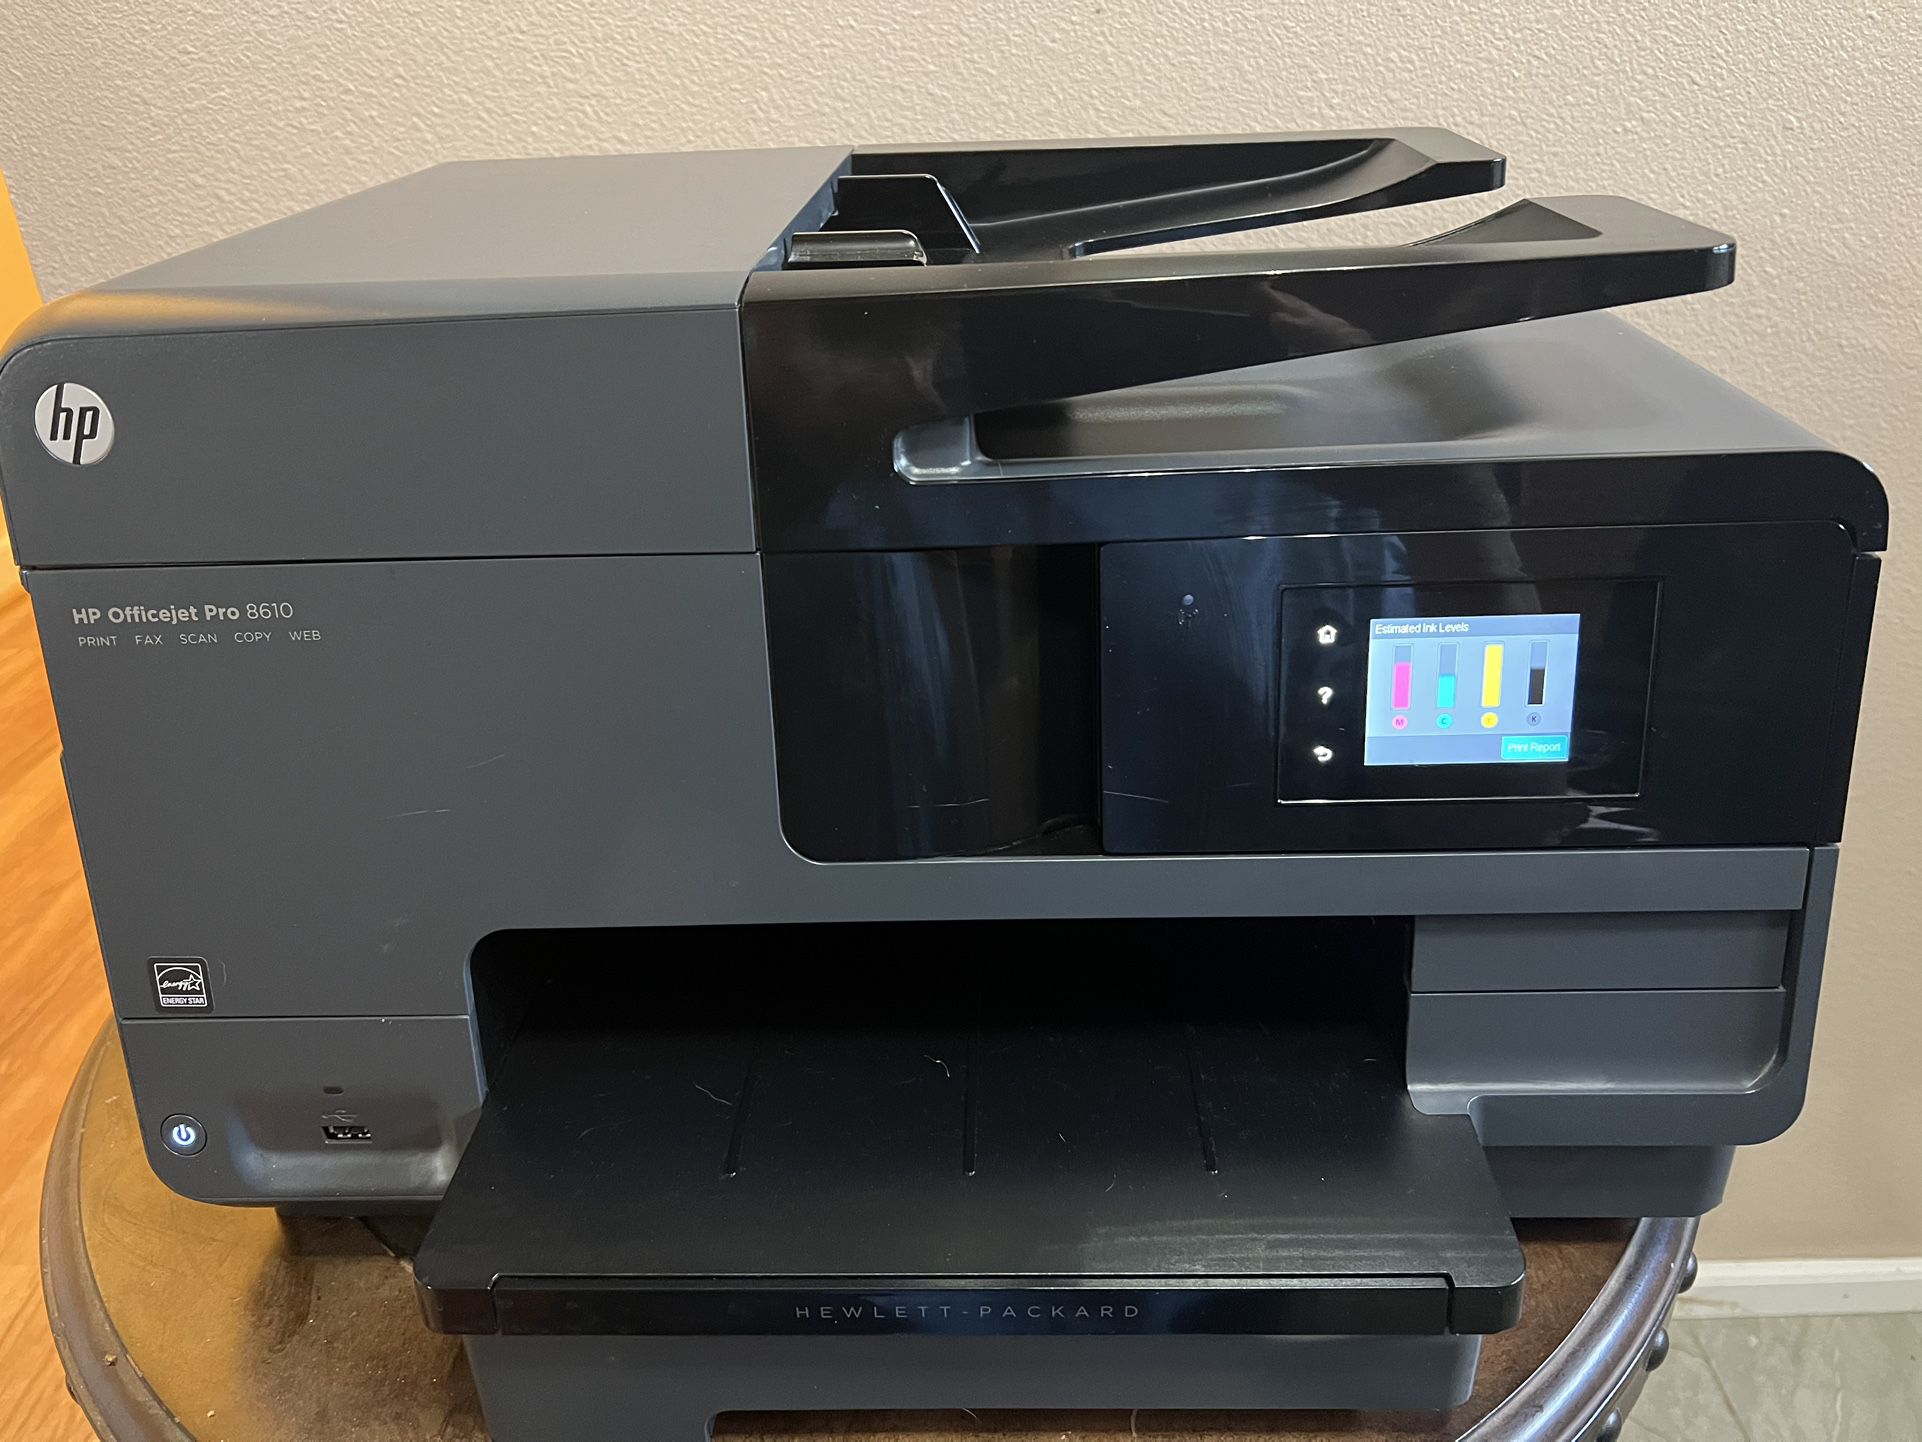 malm Suradam skelet HP Officejet Pro 8610 All In One Printer, Copier, Scanner, Fax for Sale in  Brighton, CO - OfferUp